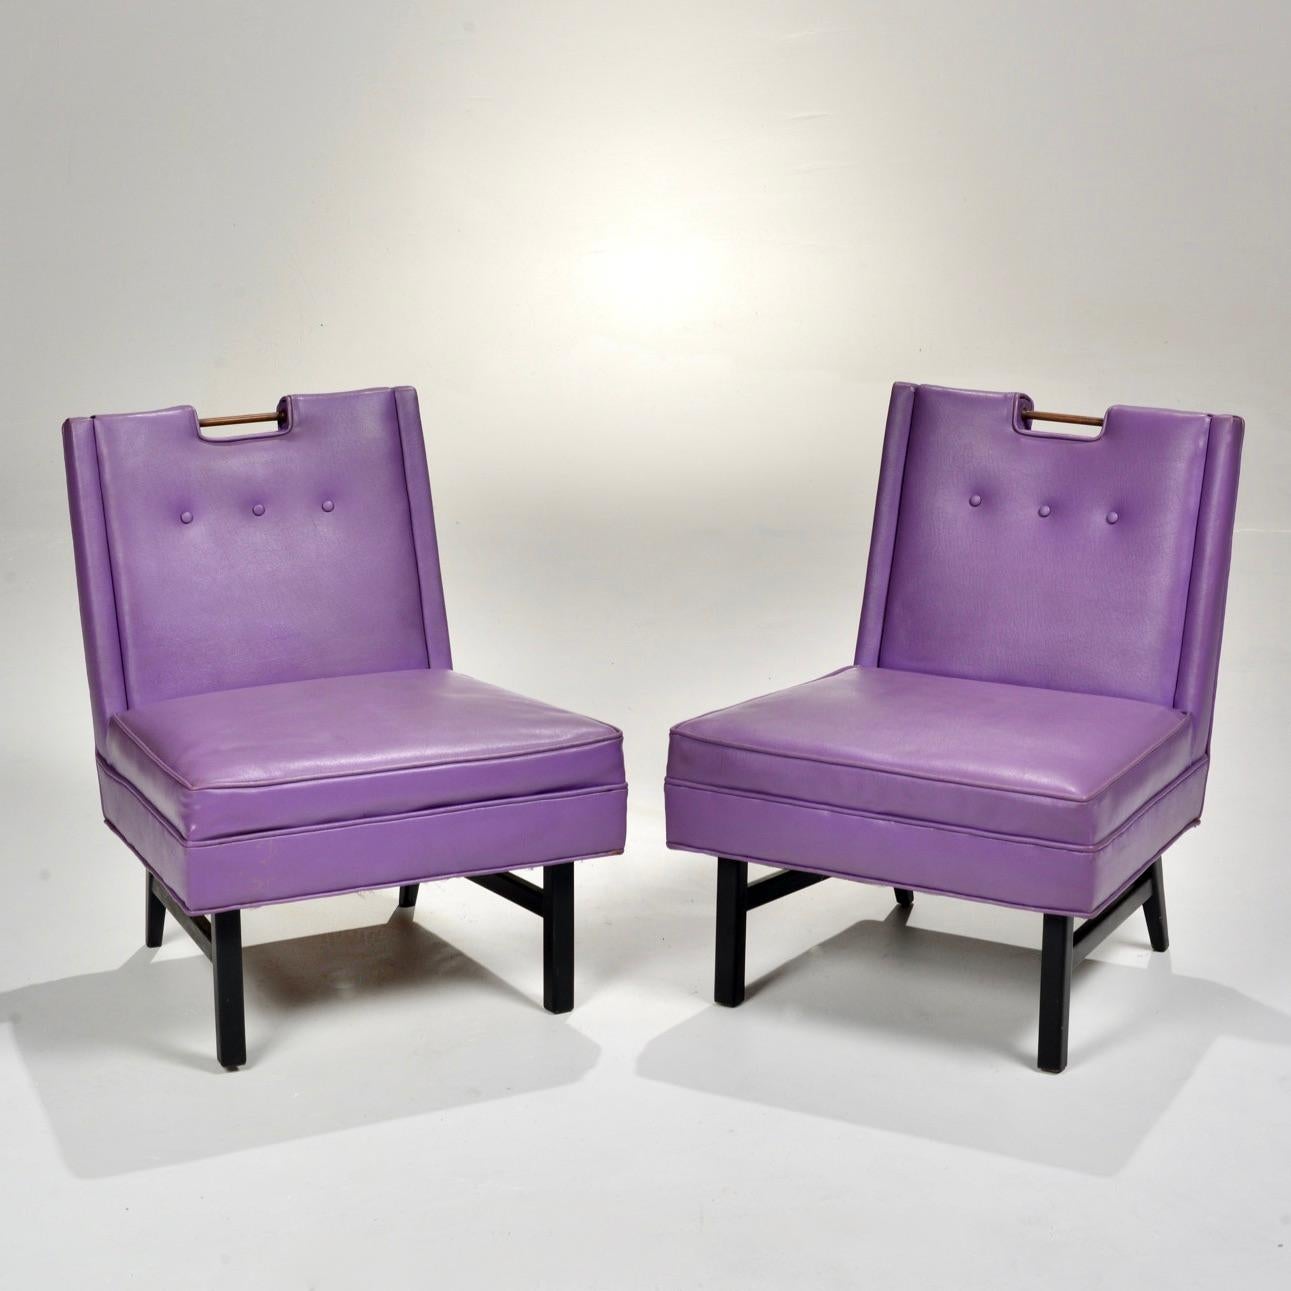 These Edward Wormley for Dunbar chairs are in great condition, with original leather and brass handles. Upholstery options are available. We have 2 of these chairs in purple, and 4 of these chairs in black, for a total of 6.




   